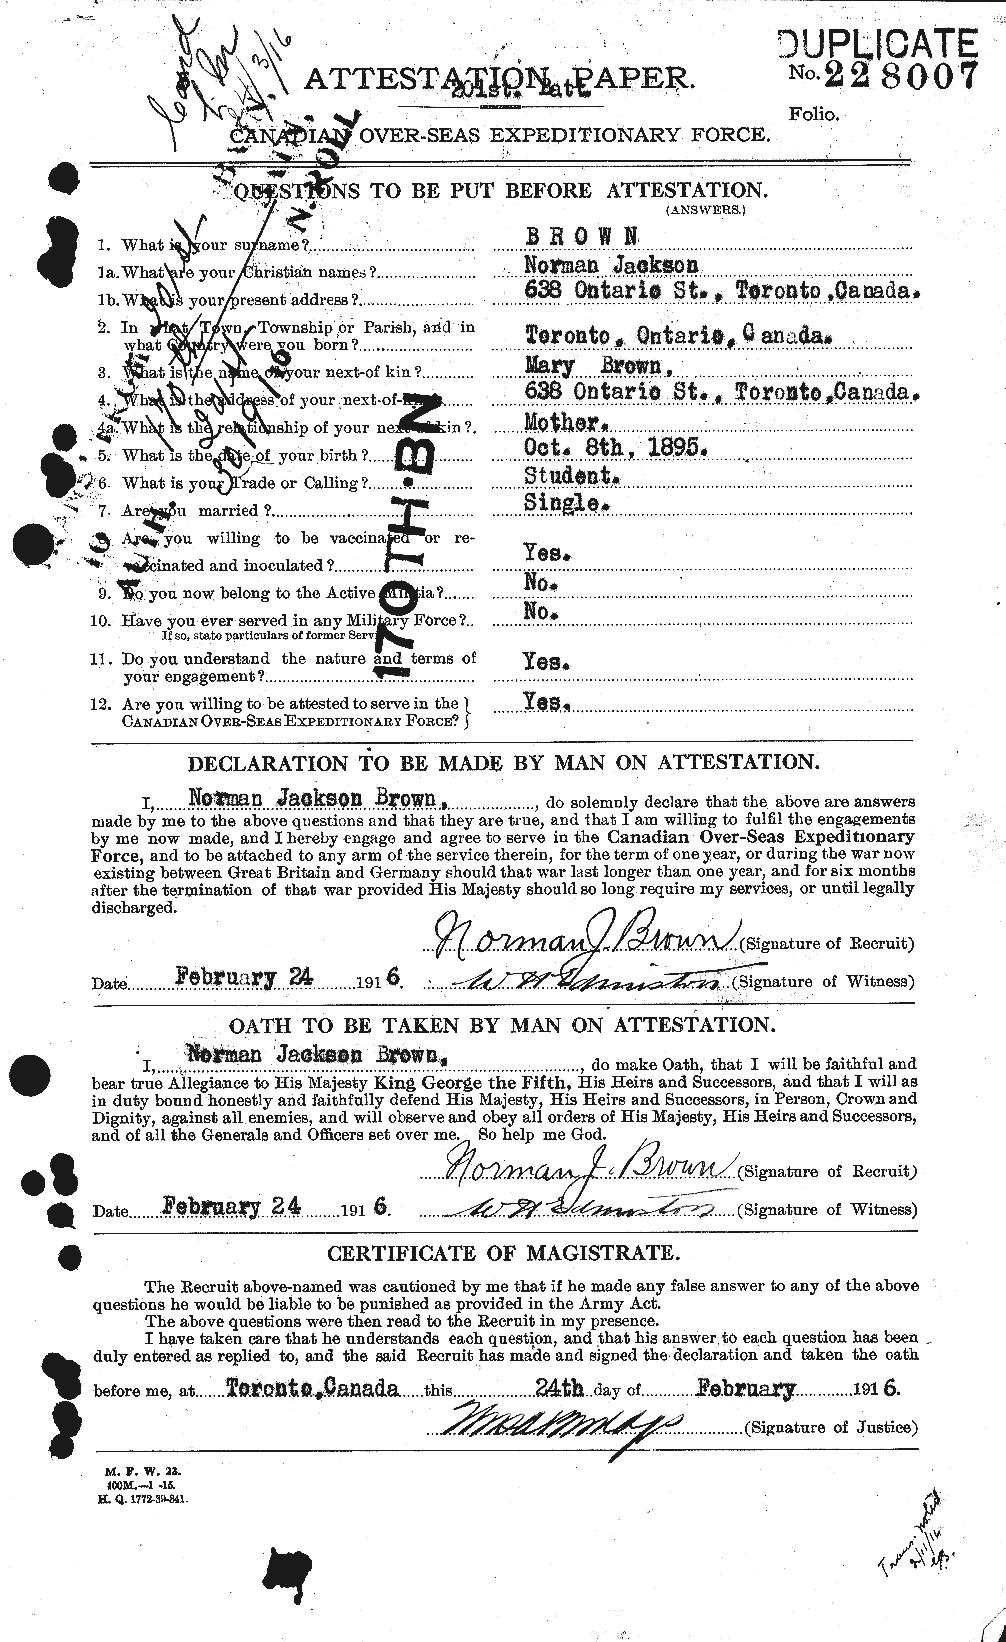 Personnel Records of the First World War - CEF 267112a